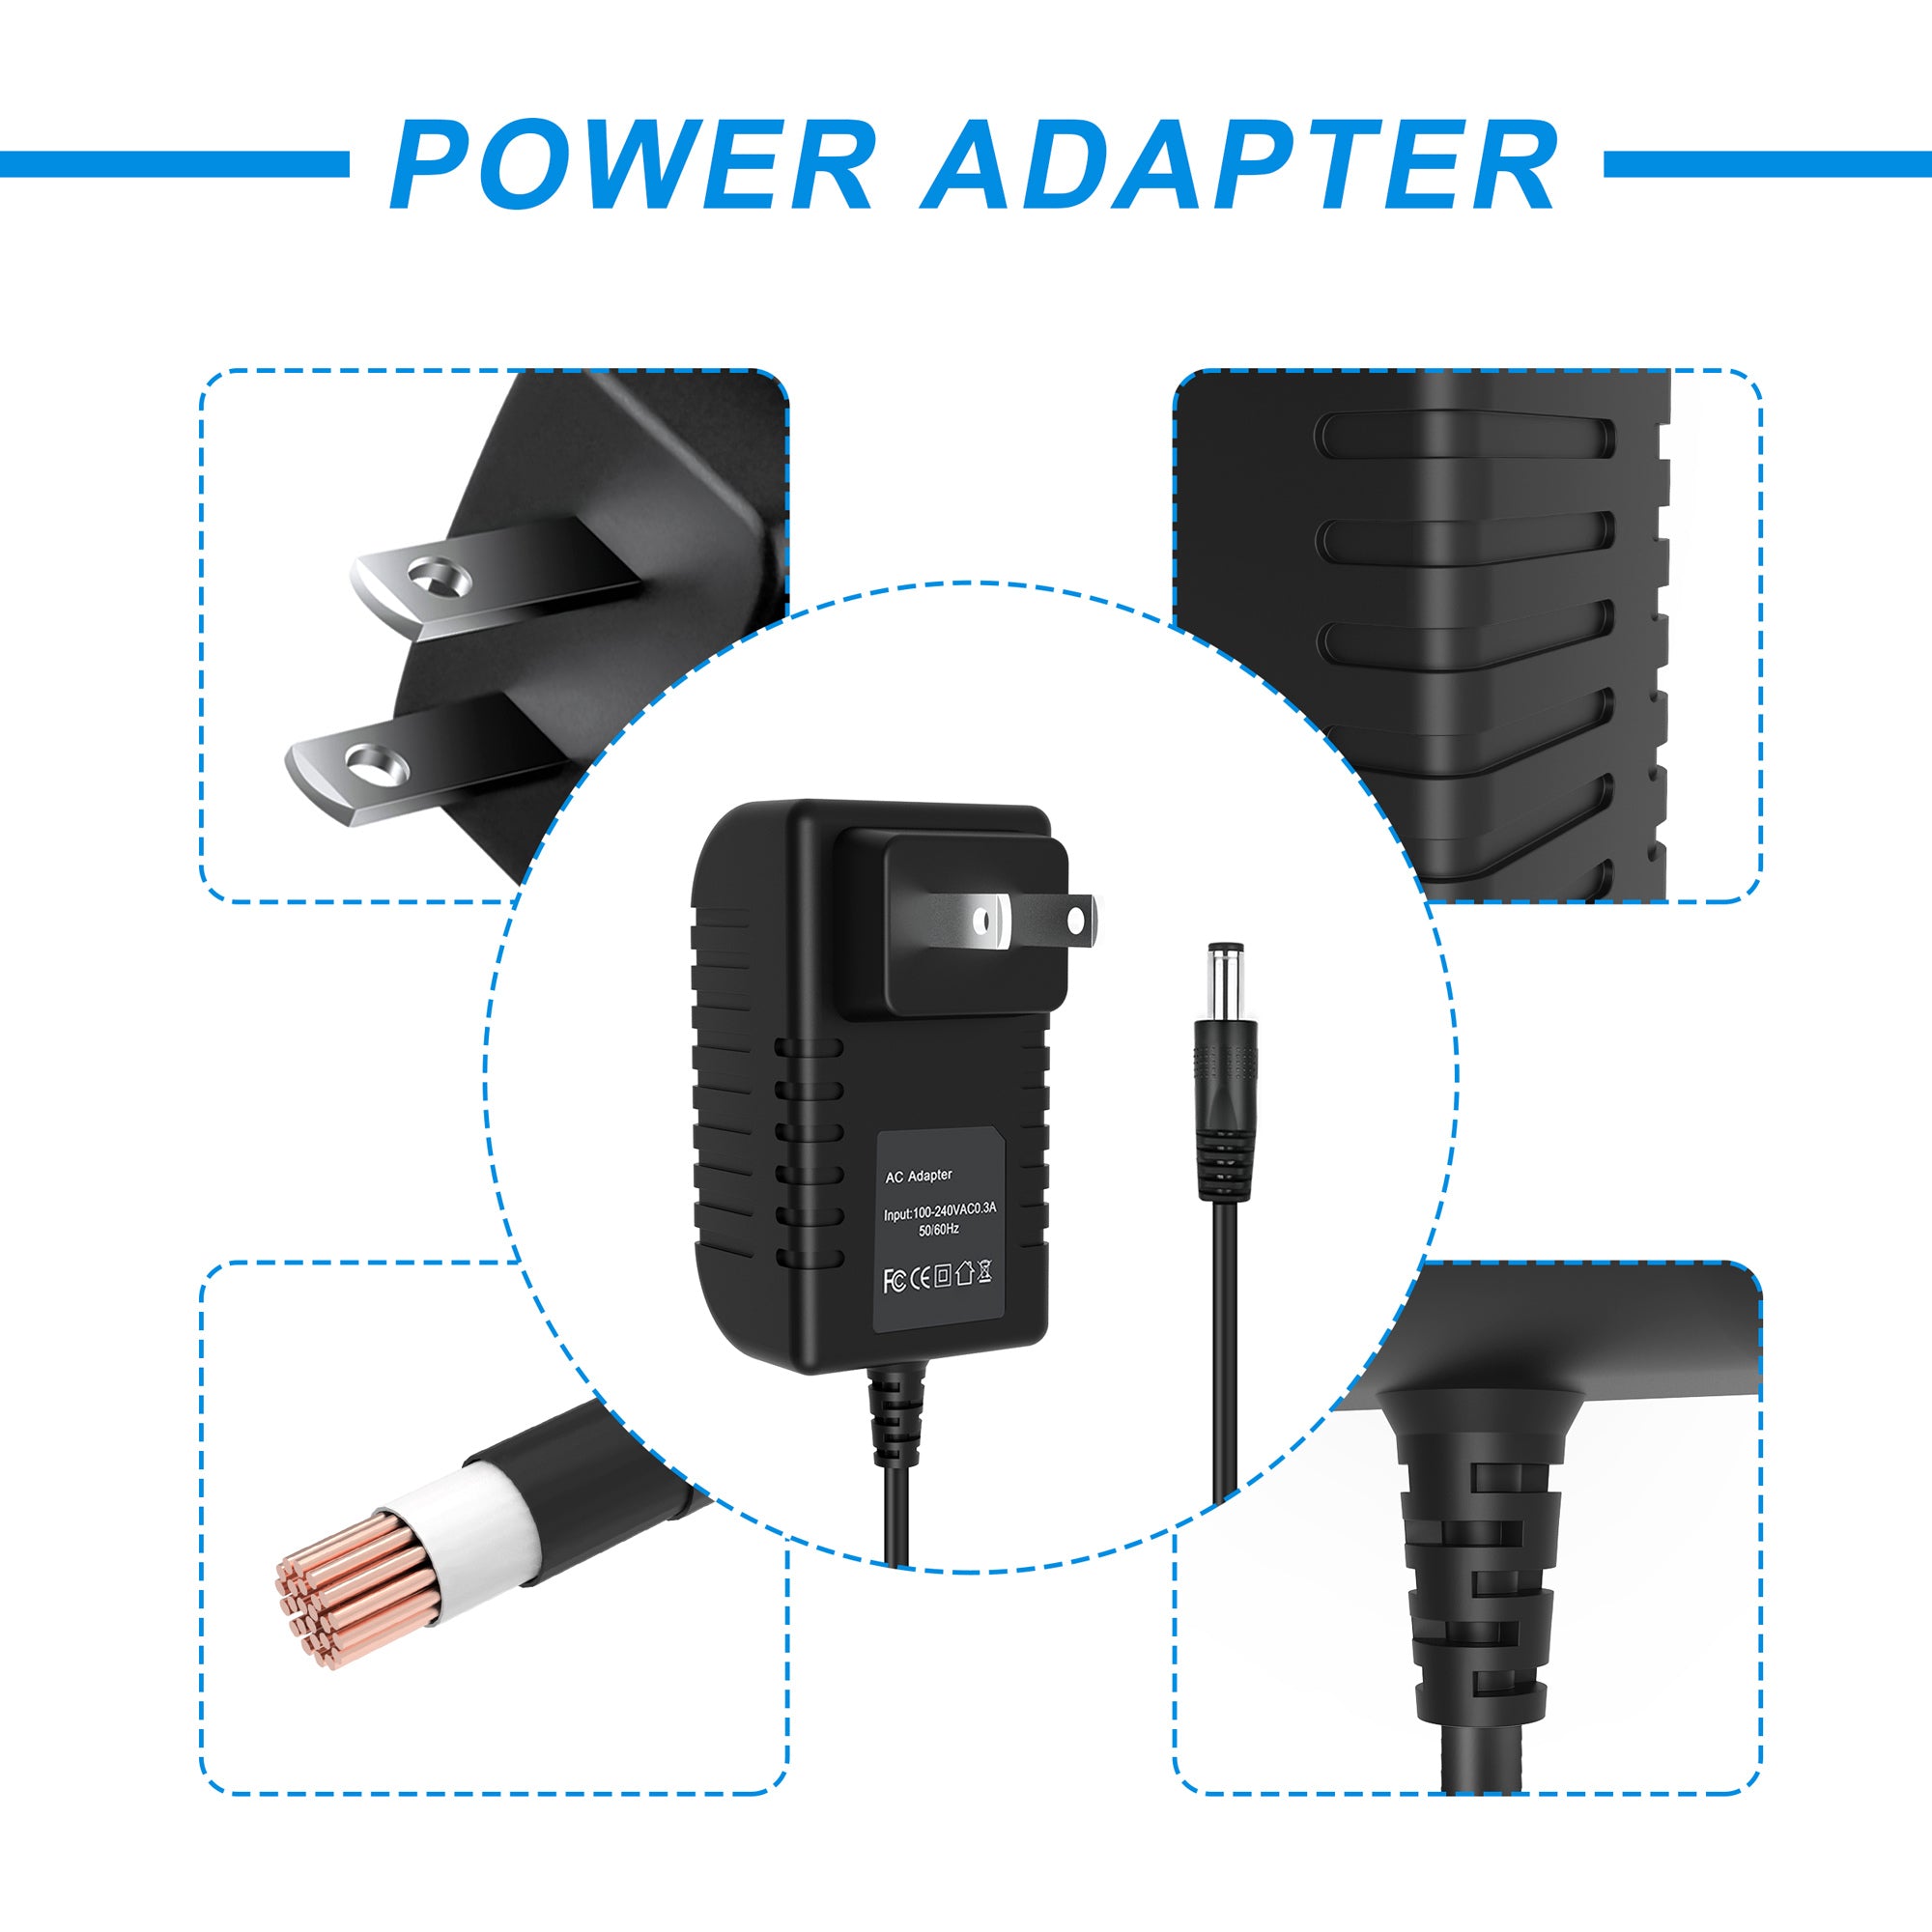 AbleGrid  6V AC/DC Adapter Compatible with  NMSQ-210 NMSQ-215 NMSQ-210-2 NMSQ-210BK-2 NMSQ-215-2-HY Neck and Shoulder Massager, BKL-100 Squish Massaging Massager 6VDC Power Supply Cord